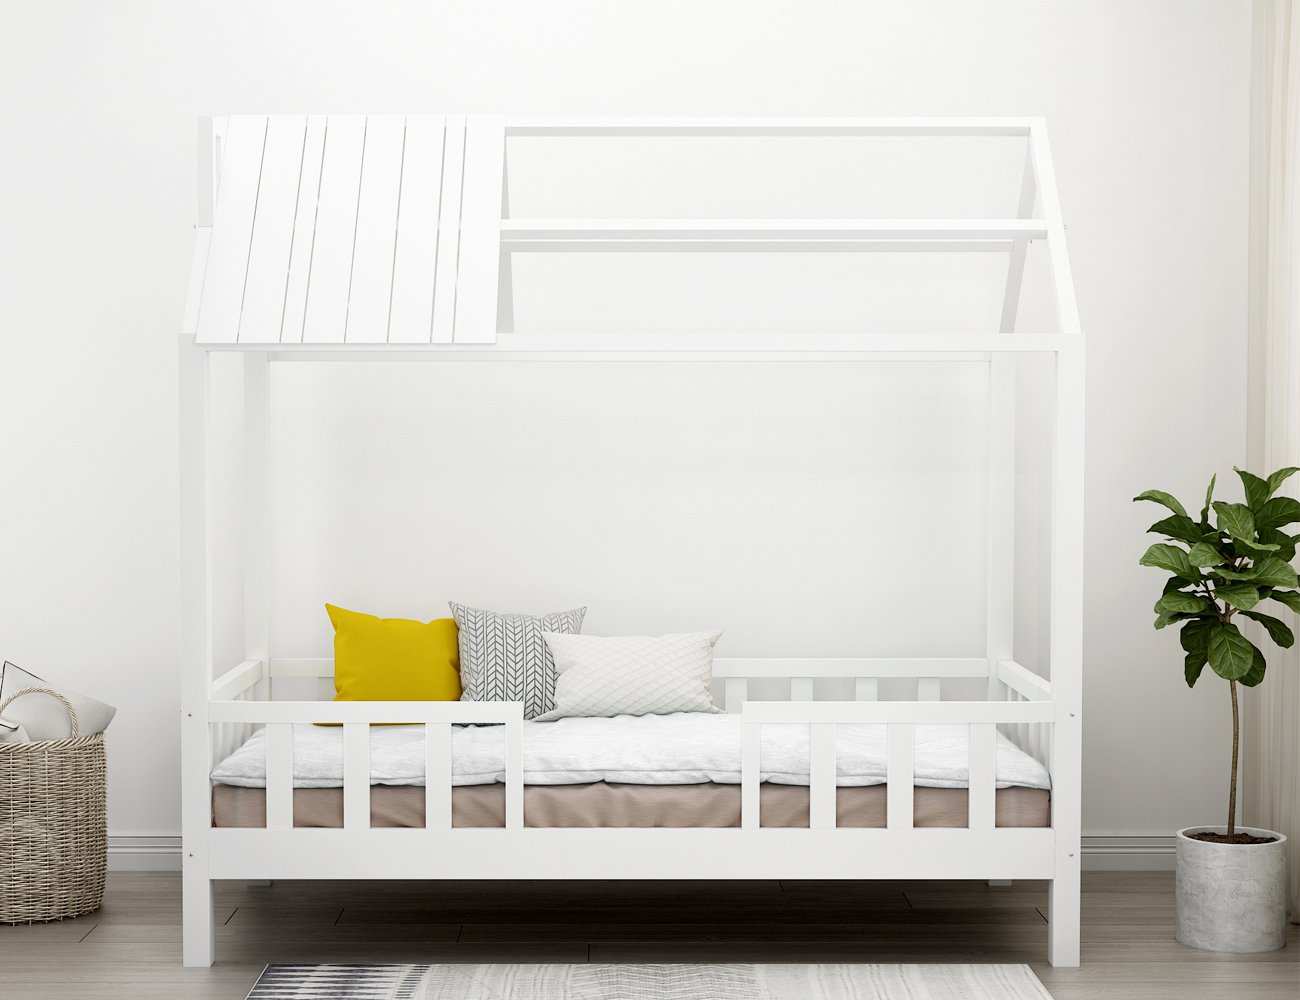 king bed frame with mattress set